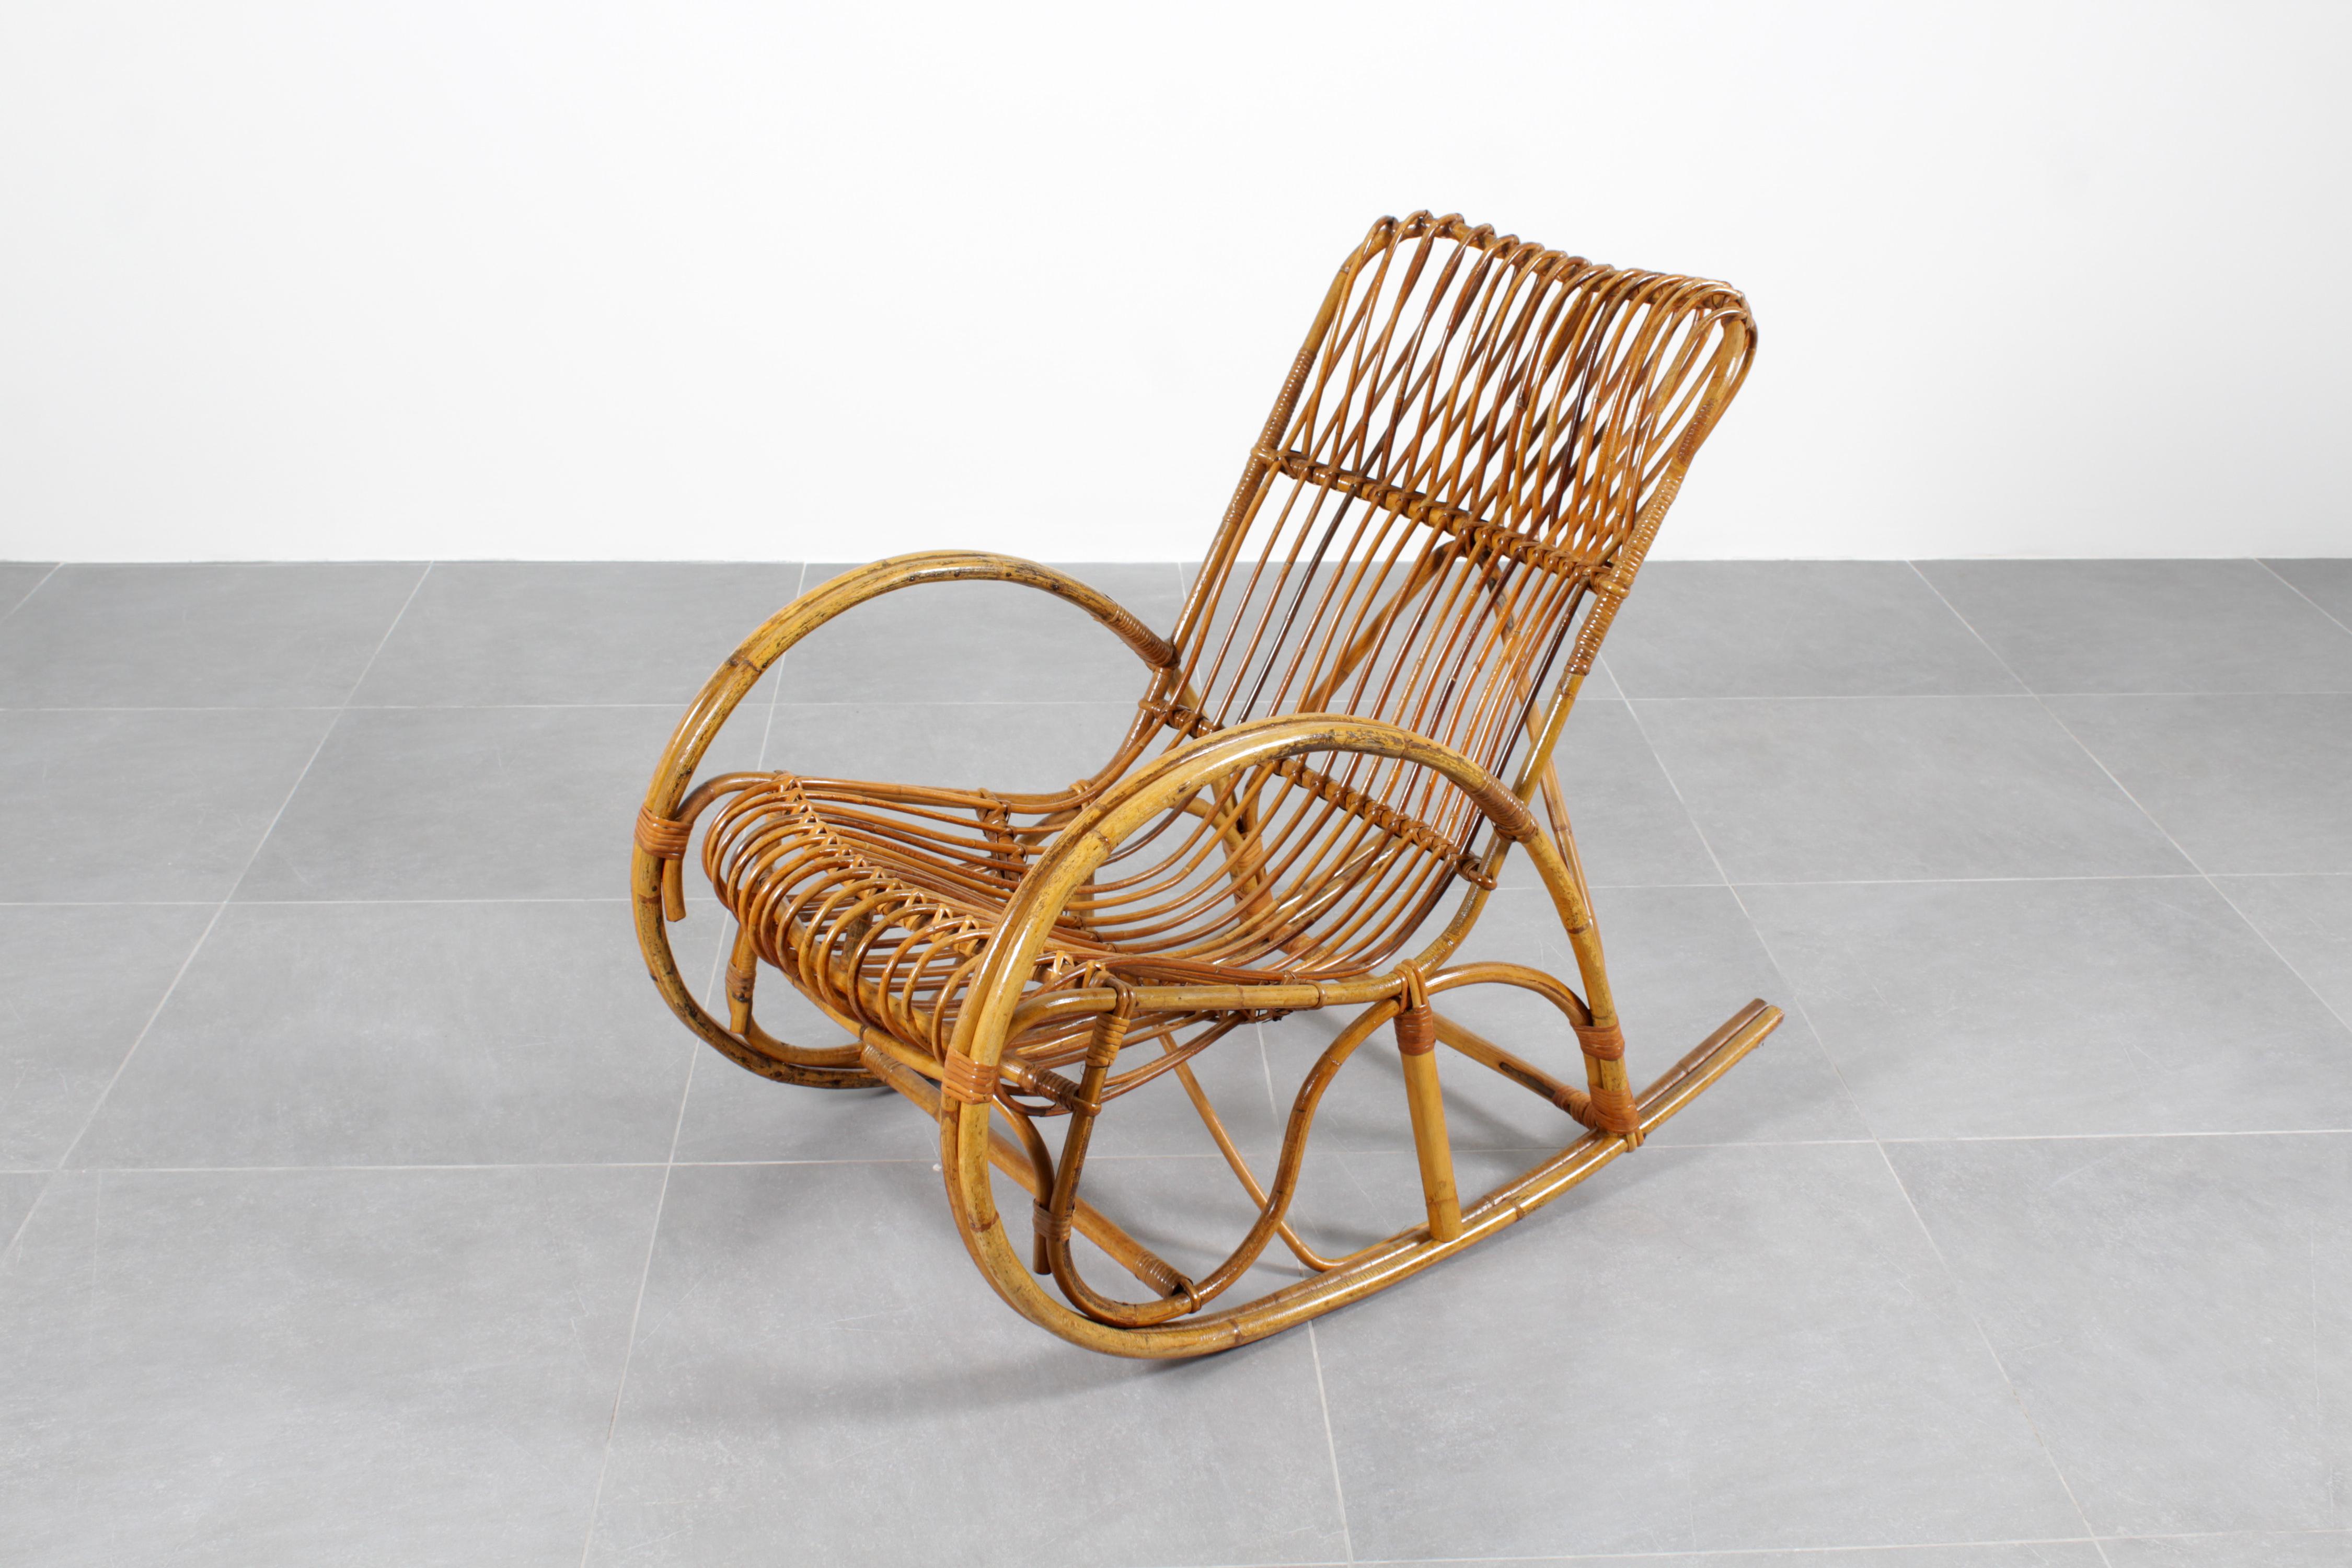 Beautiful rocking chair entirely in bamboo cane with rattan weaving connecting elements. Handmade in the style of Franco Albini, Italy 1960s.
Wear consistent with age and use.